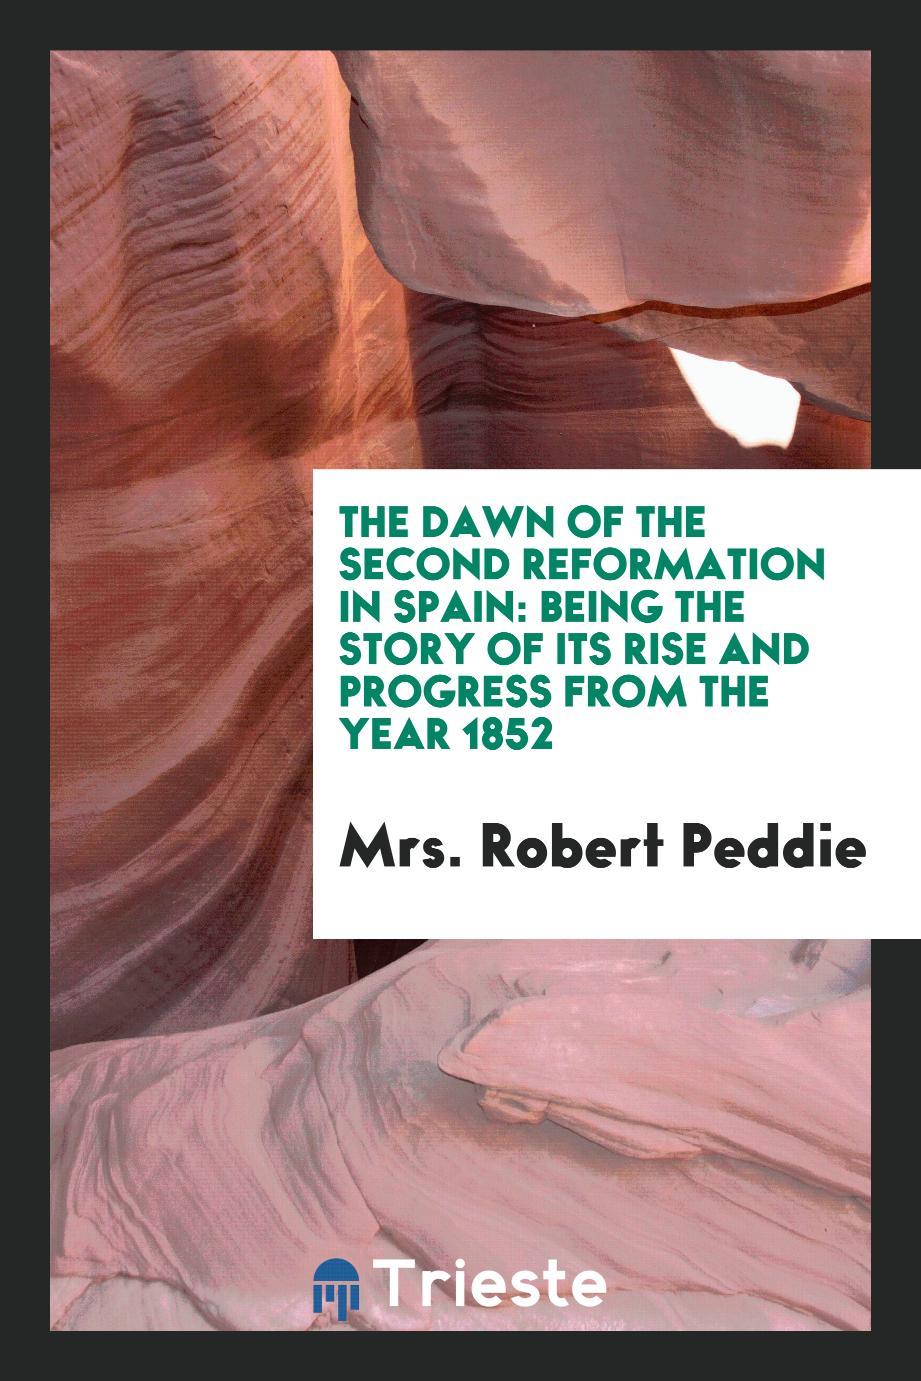 The Dawn of the Second Reformation in Spain: Being the Story of Its Rise and Progress from the Year 1852